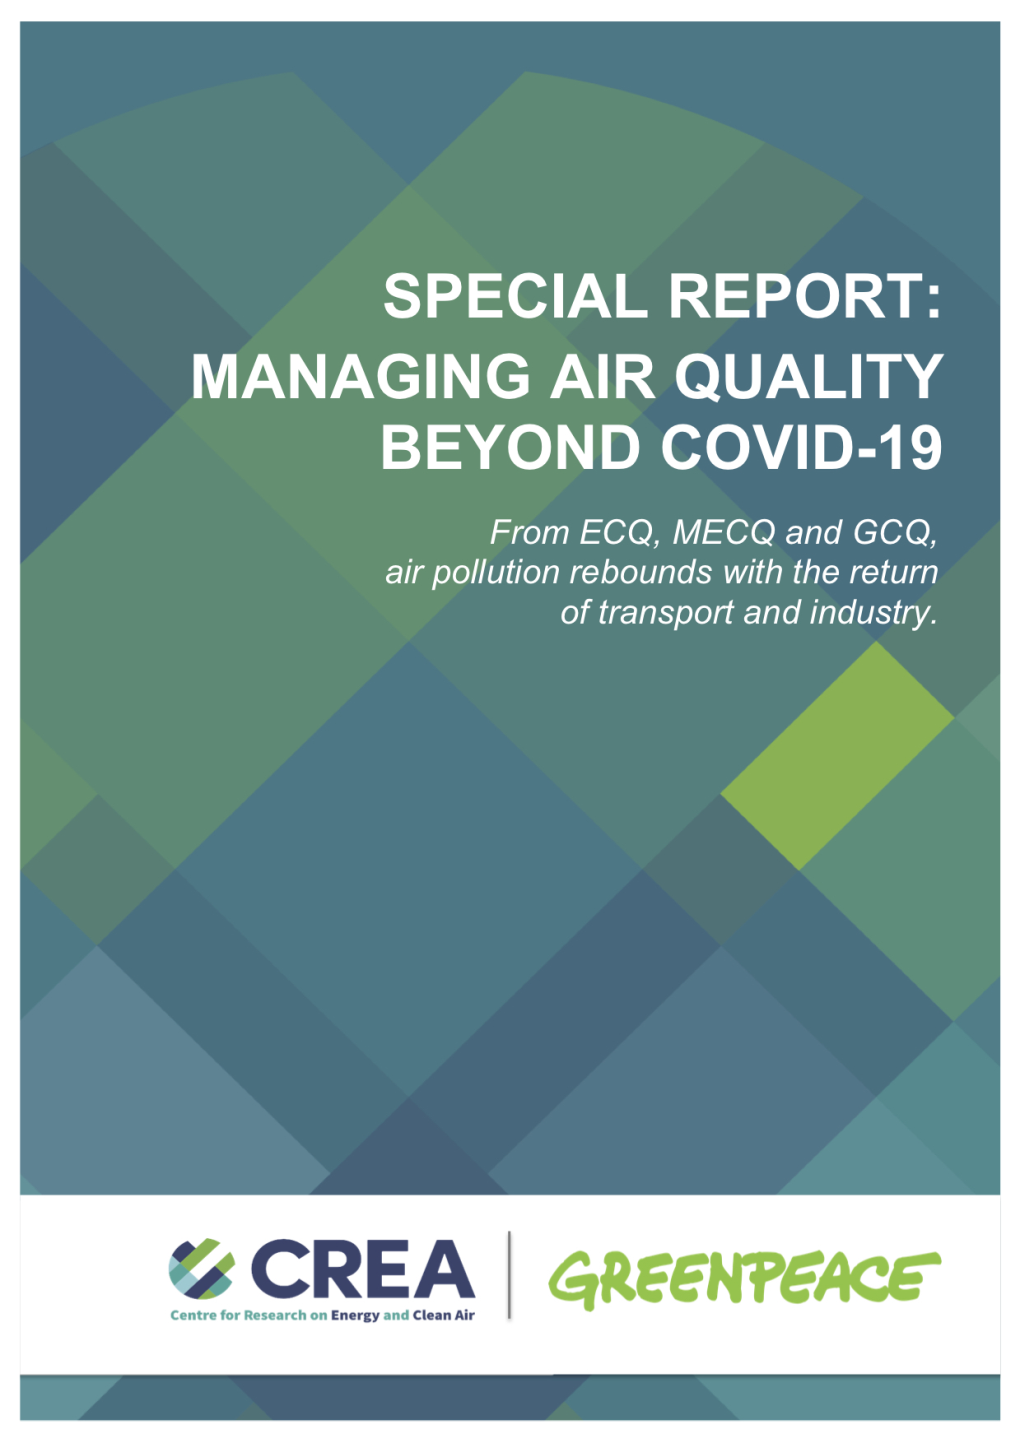 SPECIAL REPORT: Managing Air Quality Beyond COVID-19 from ECQ, MECQ and GCQ, Air Pollution Rebounds with the Return of Transport and Industry